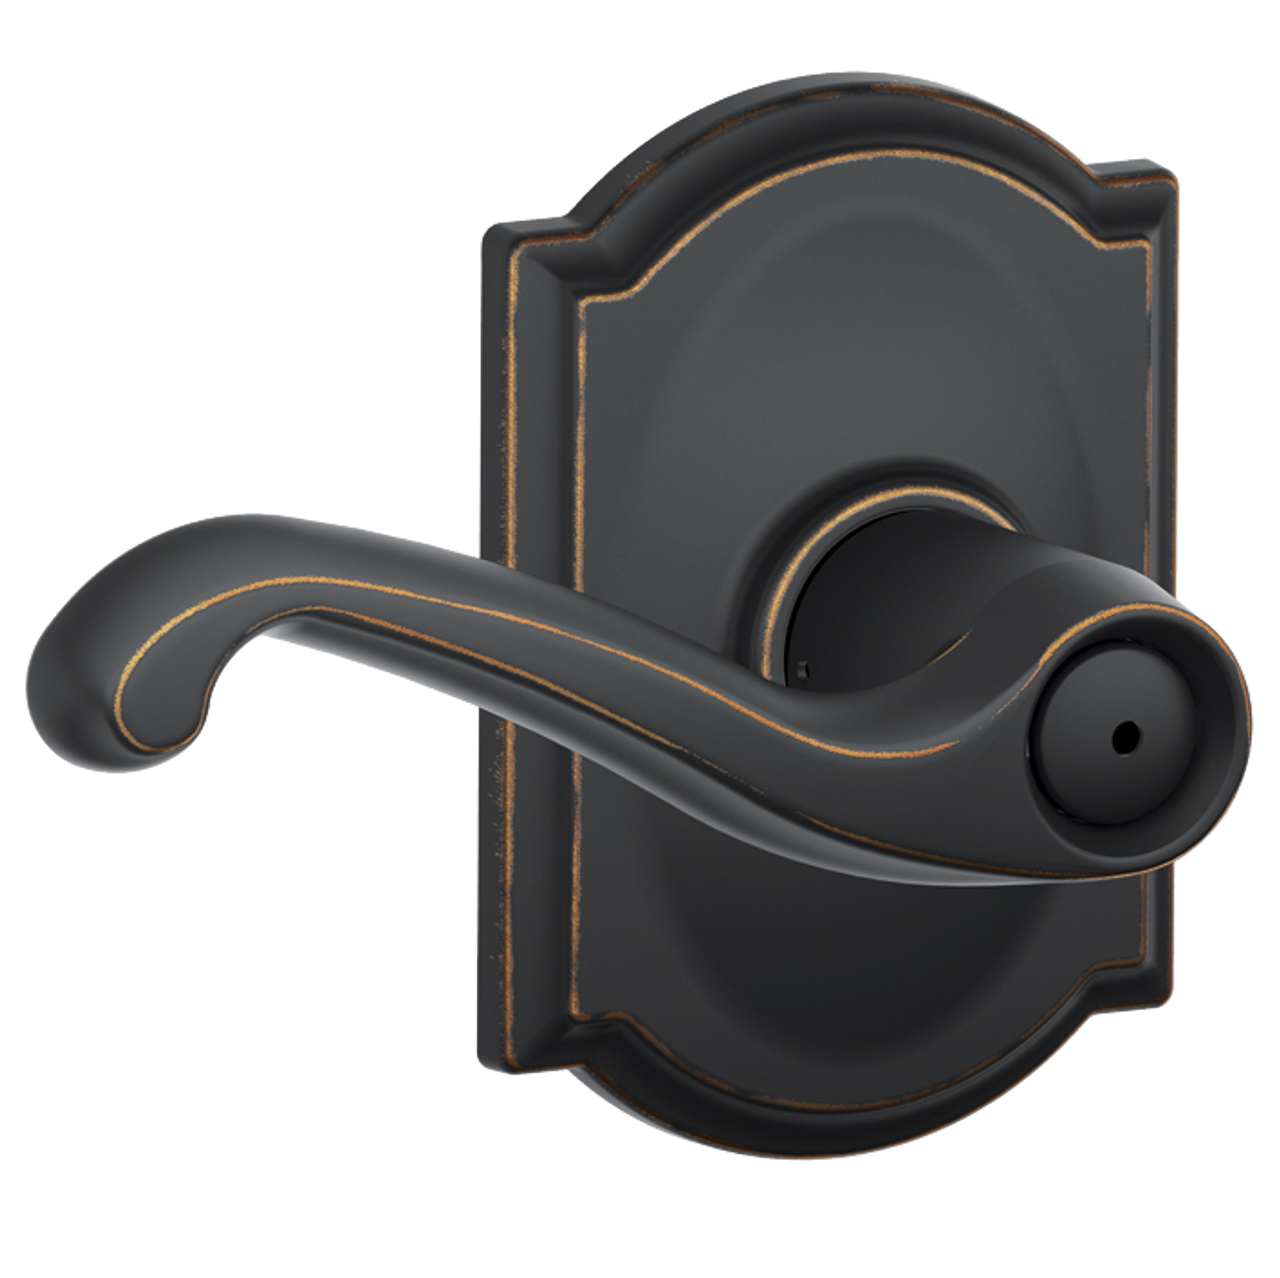 Schlage Privacy Flair Lever Door Lock with Camelot Trim